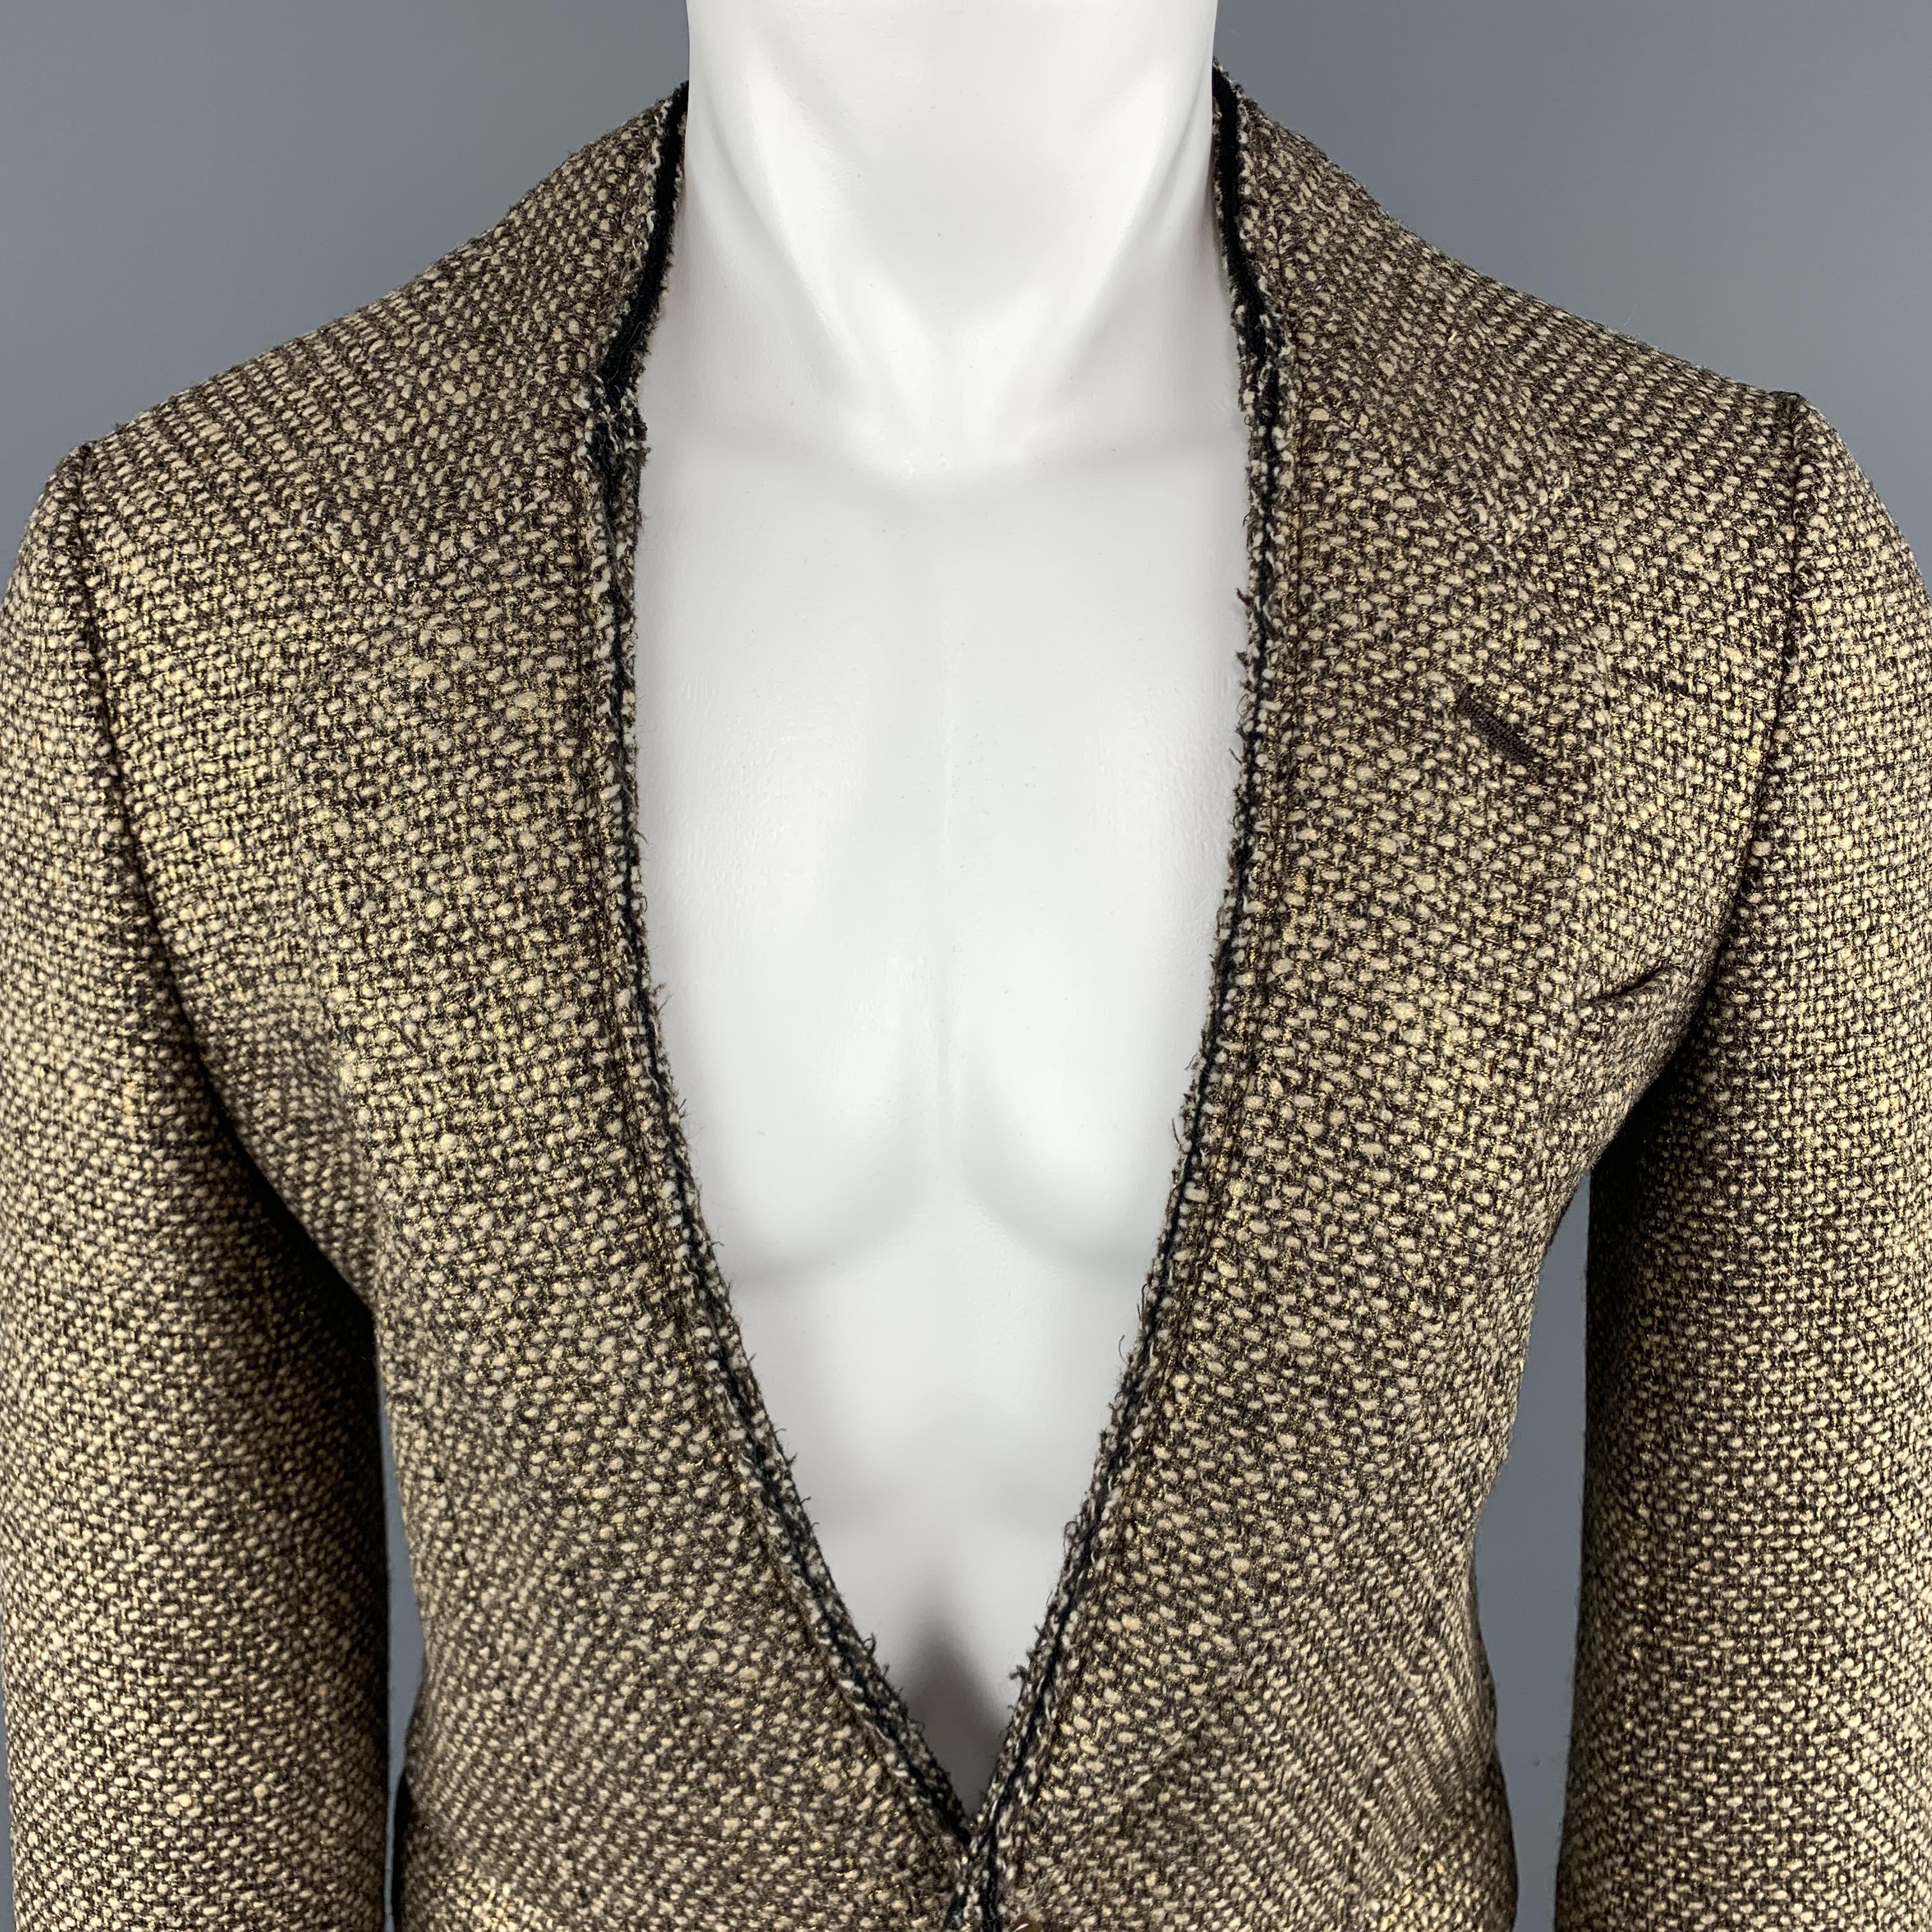 COMME des GARCONS HOMME PLUS Sport Coat comes in a gold tone in a tweed wool / nylon material, with an 